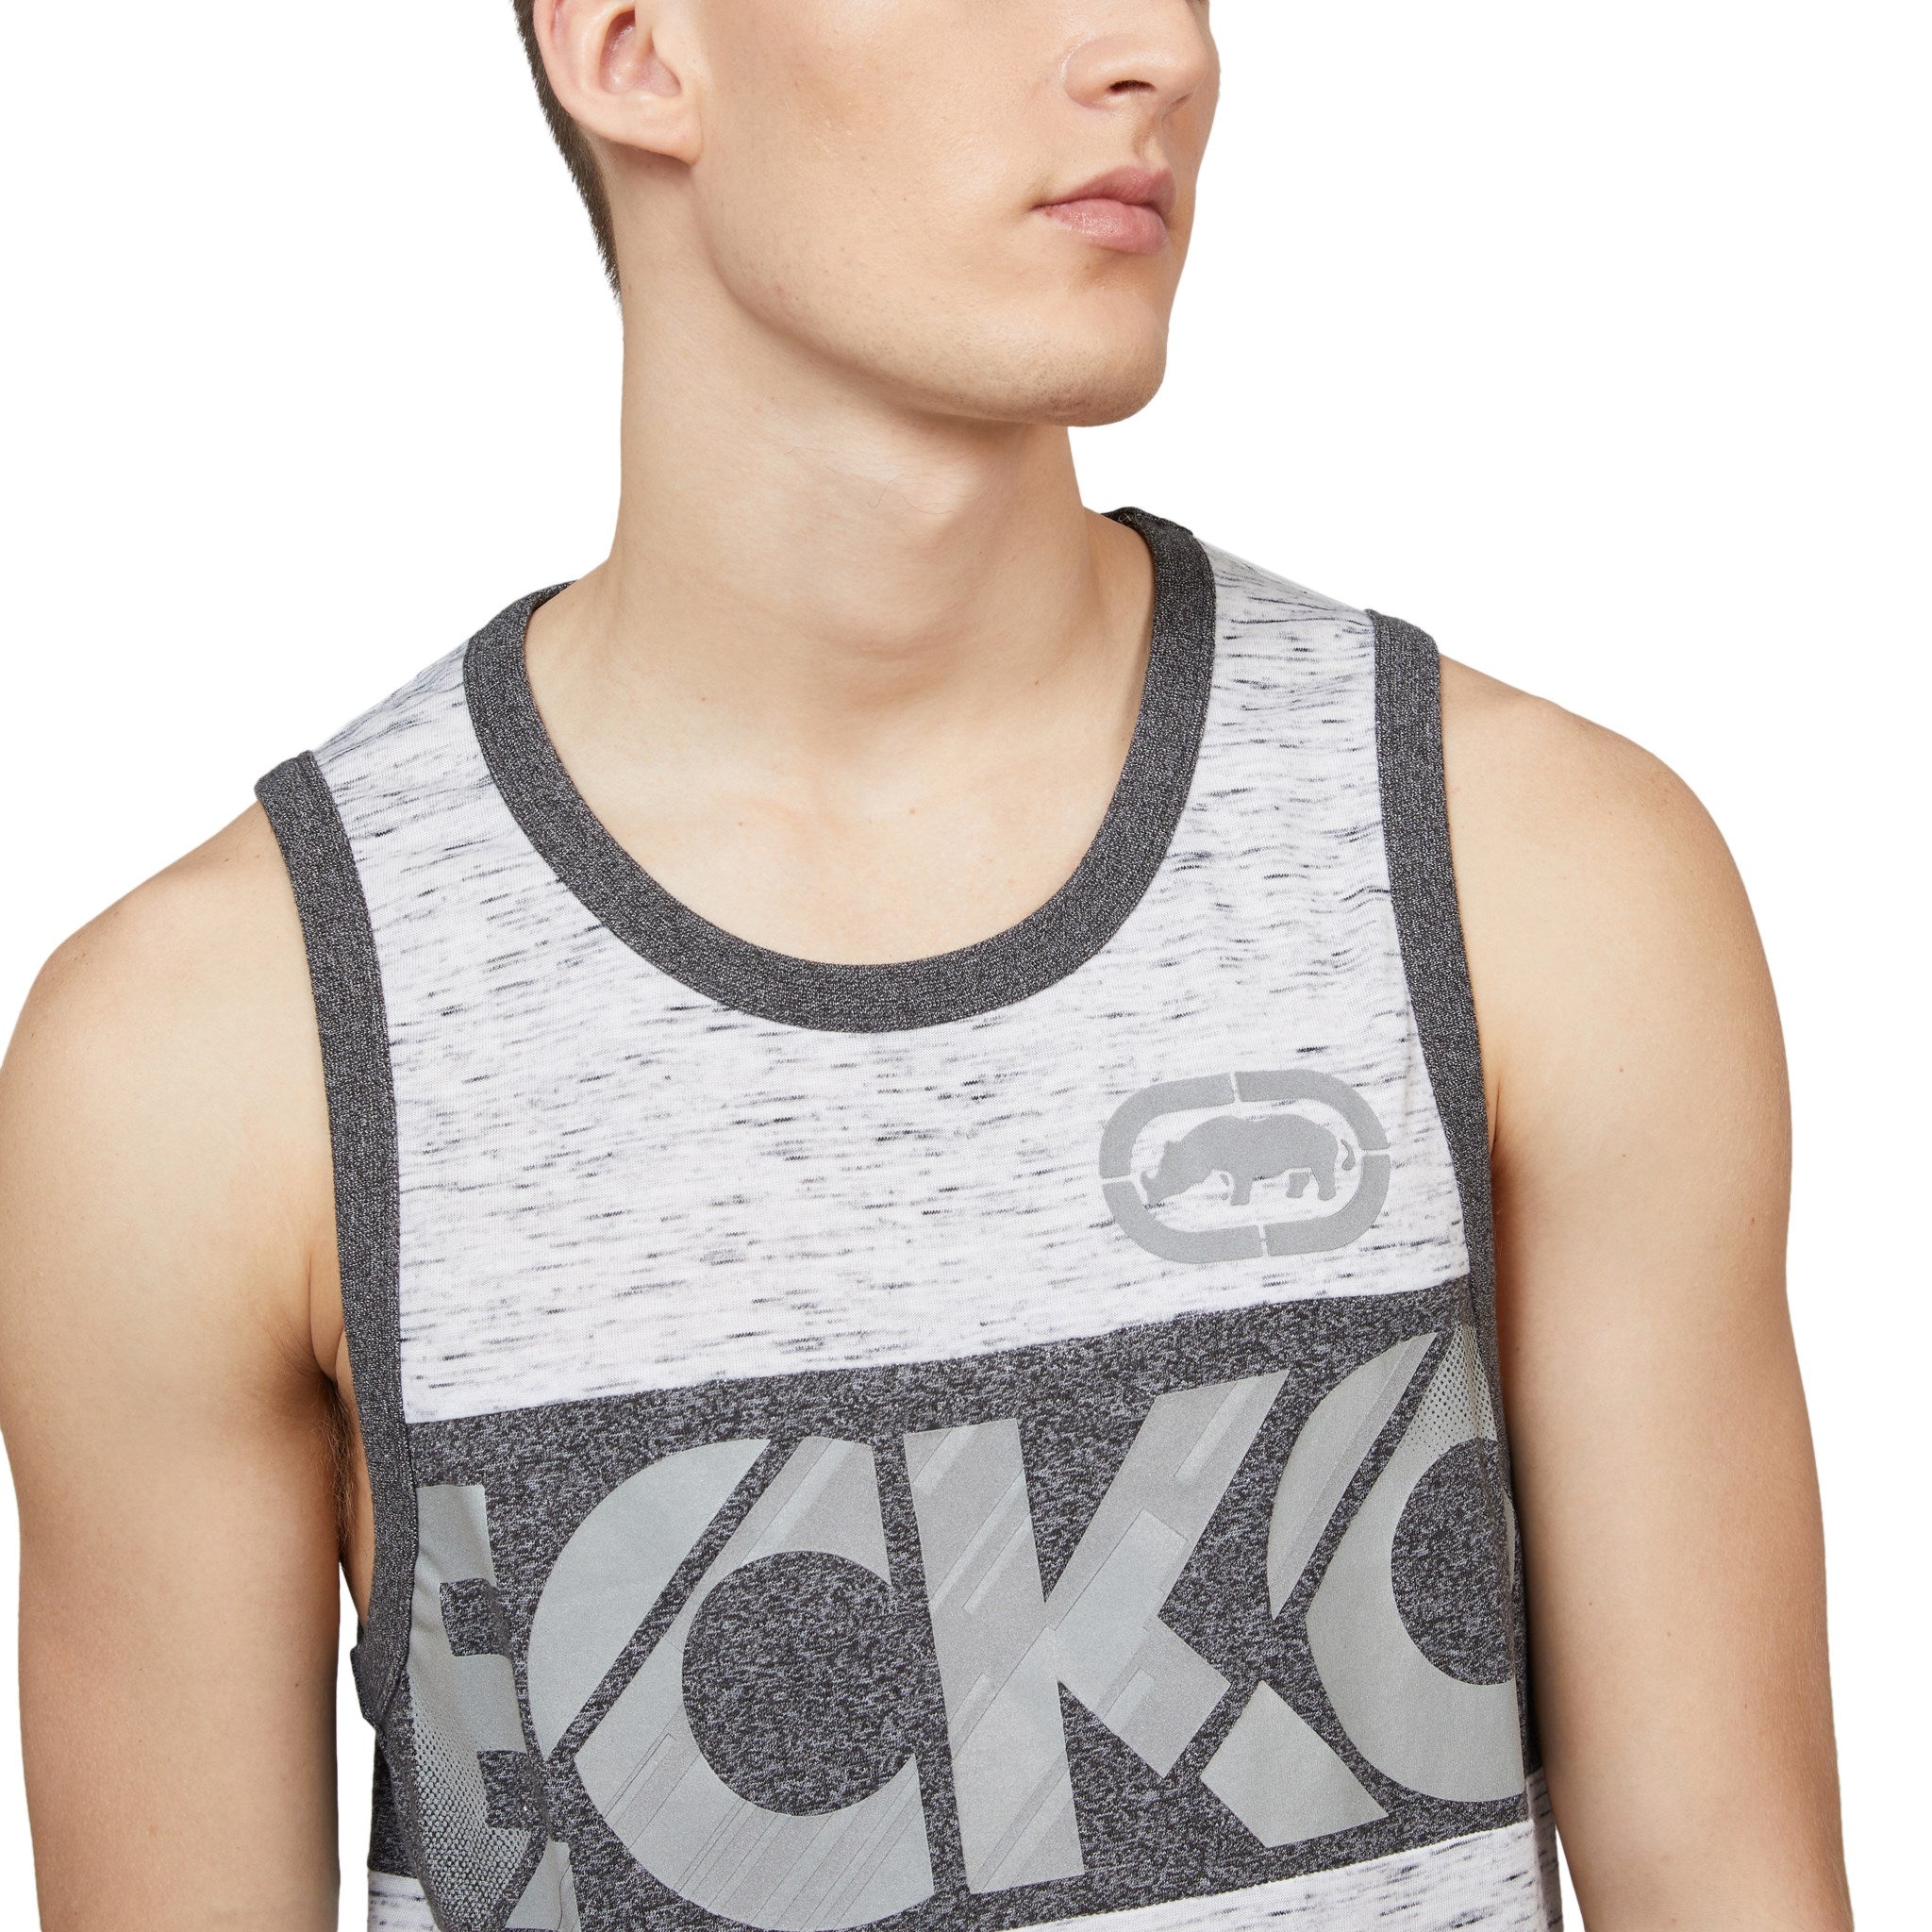 Chest Band Tank top